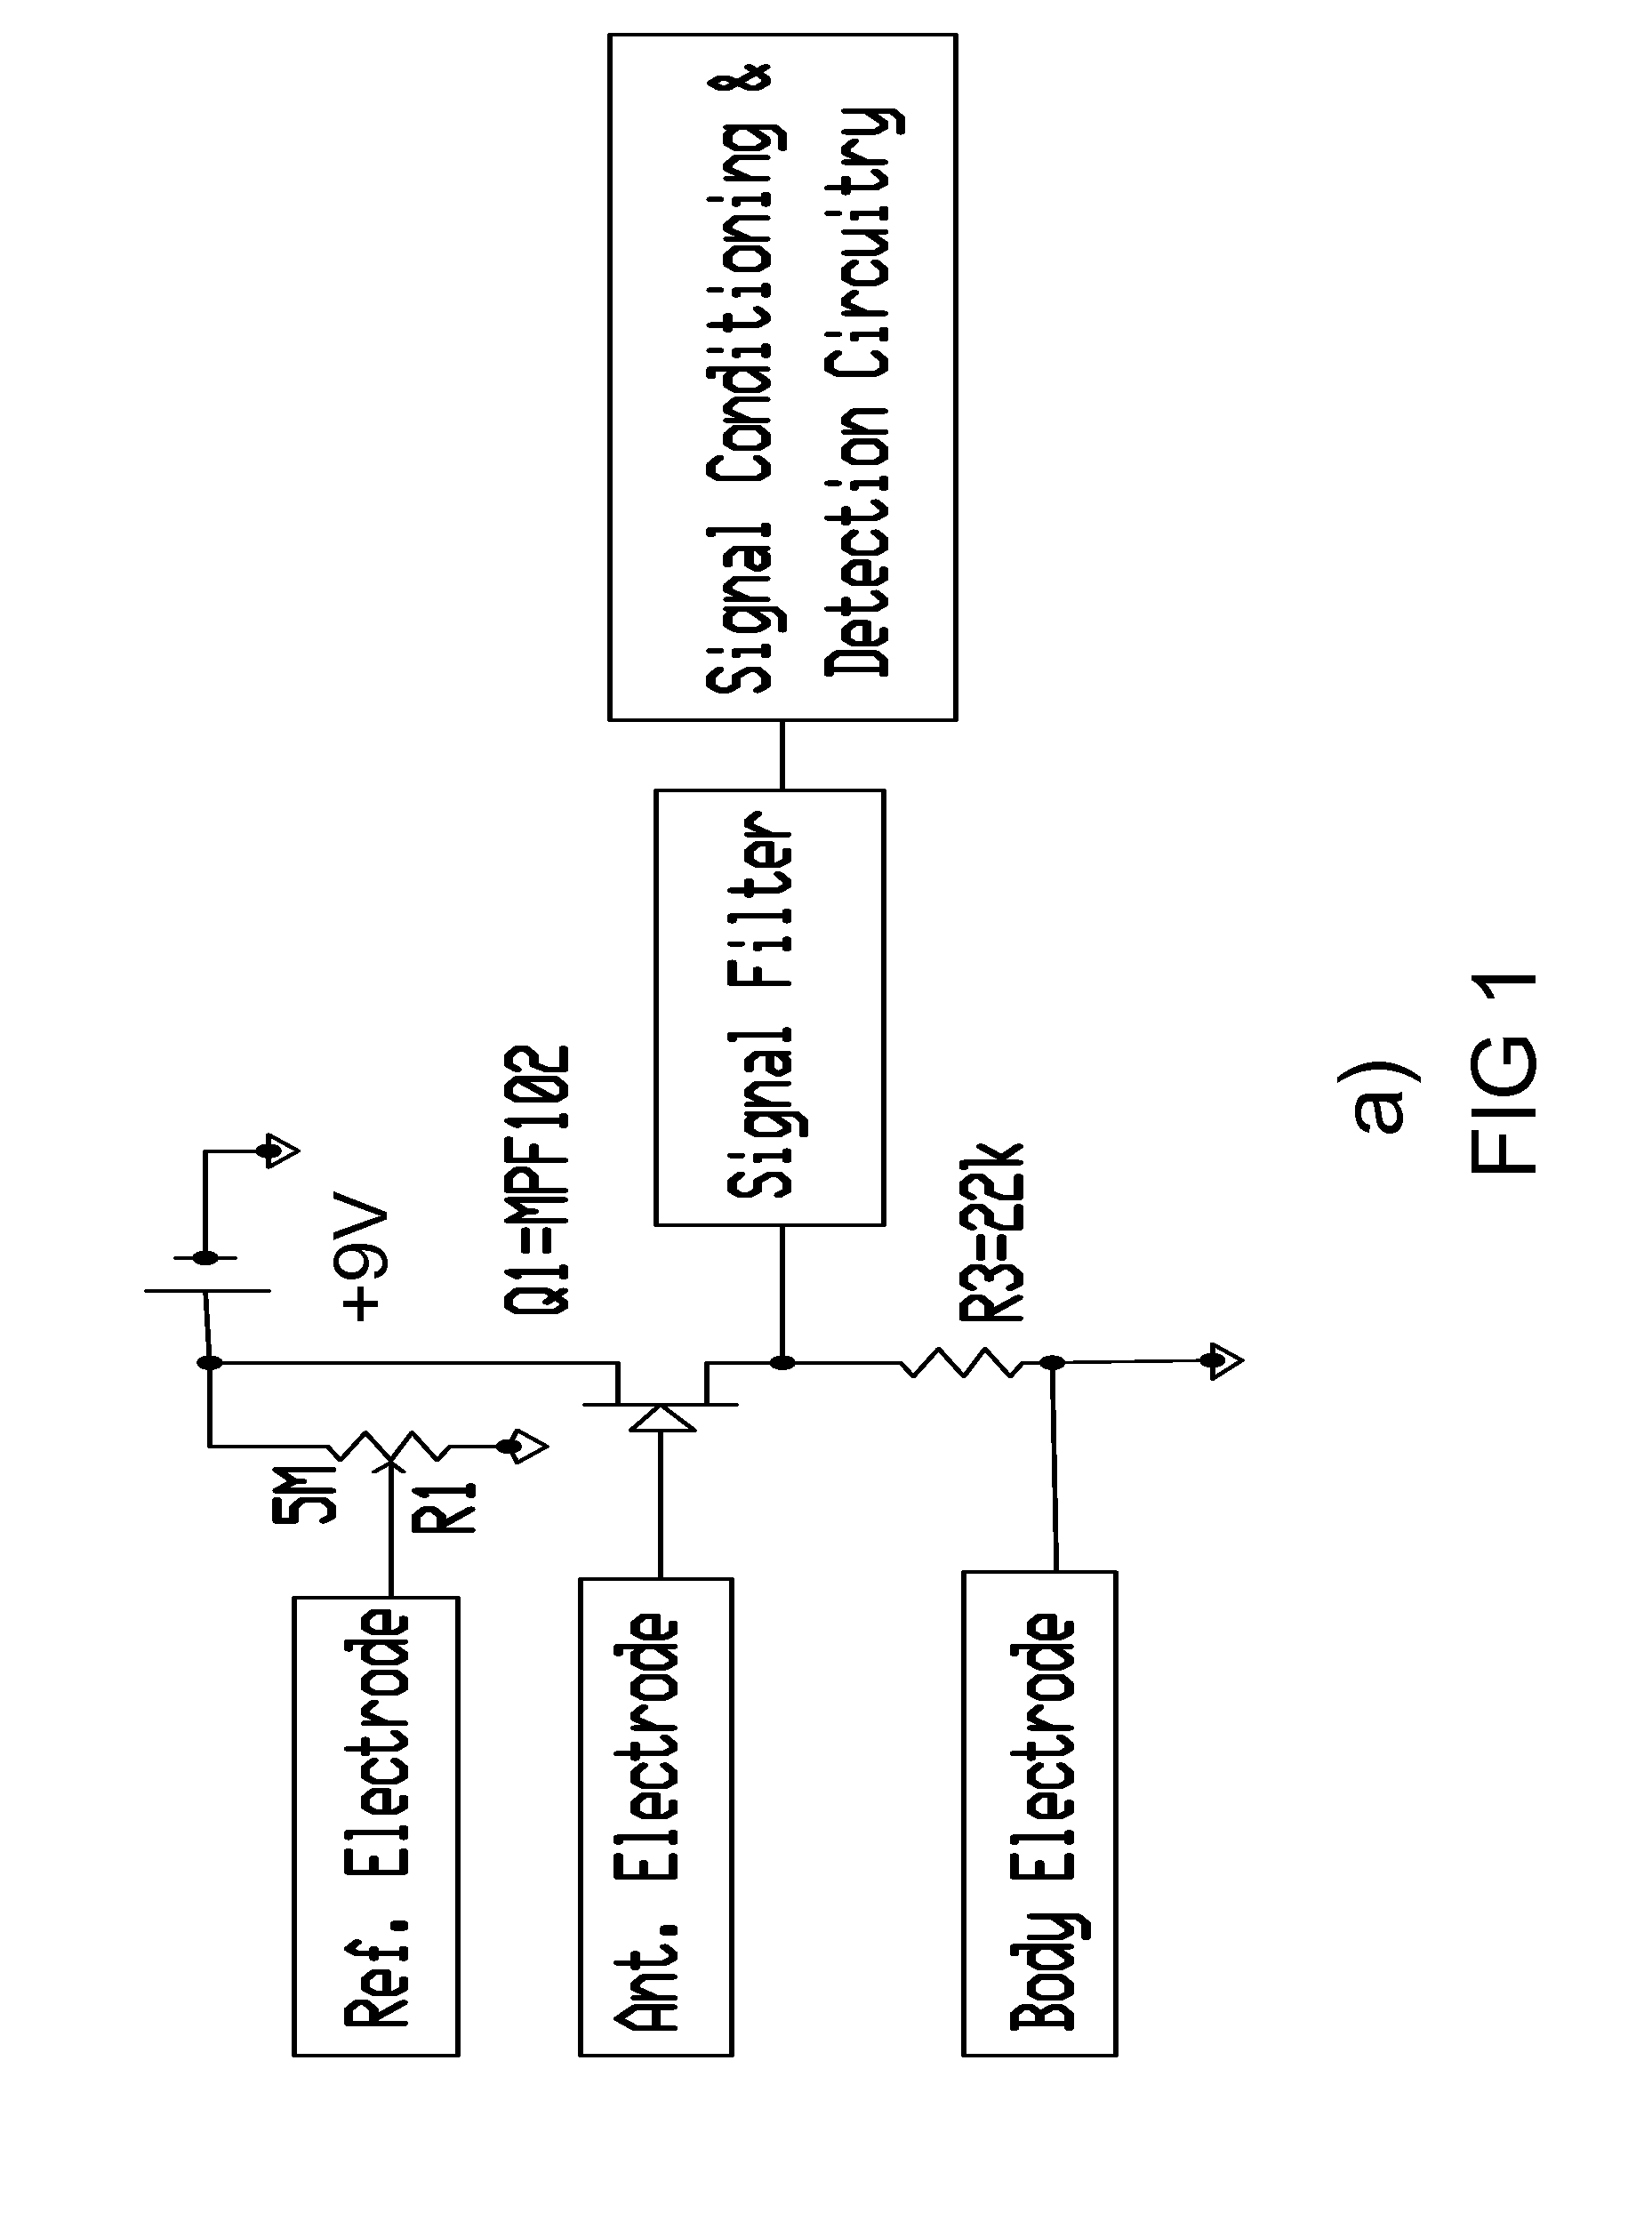 Electric Field Sensor Arrays for Interactive Gaming, Computer Interfaces, Machine Vision, Medical, Imaging, and Geological Exploration CIP